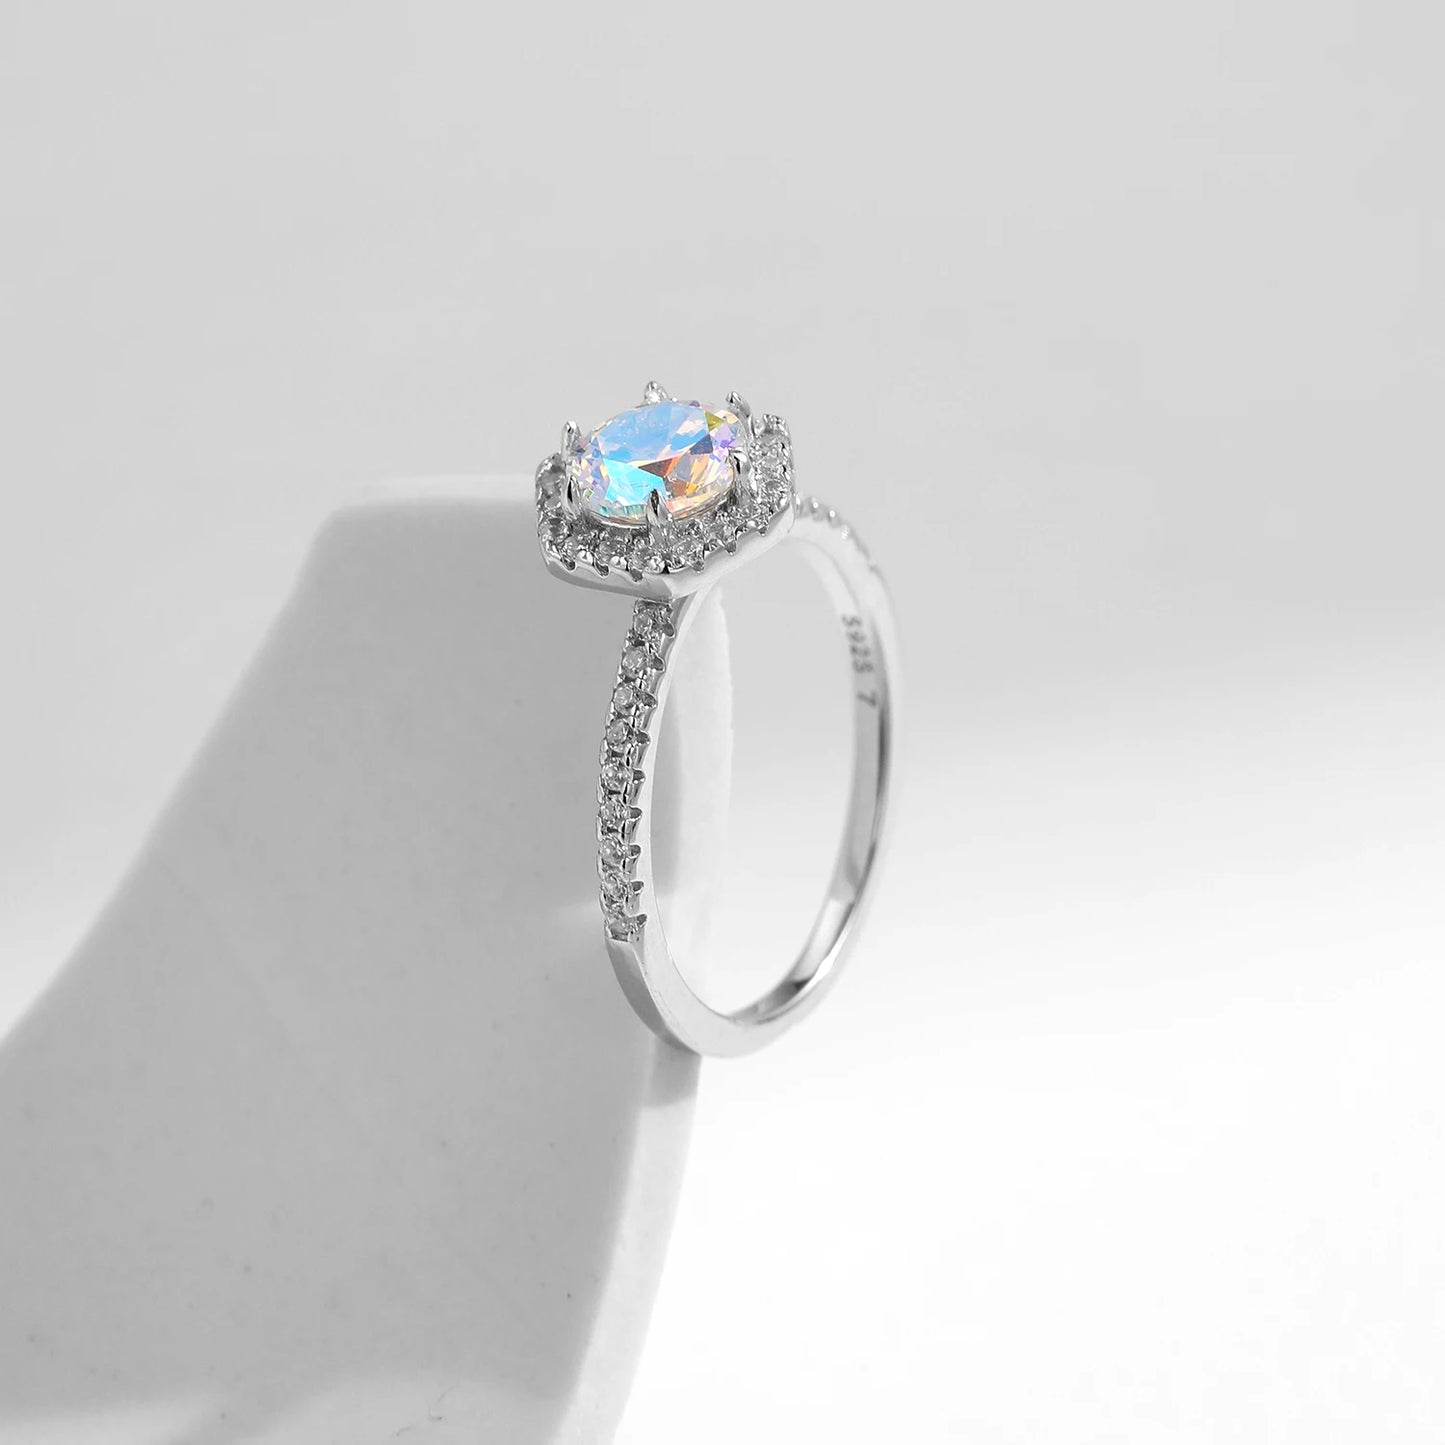 Stunning MQ 925 Silver Colorful Round Ring - Perfect for Women